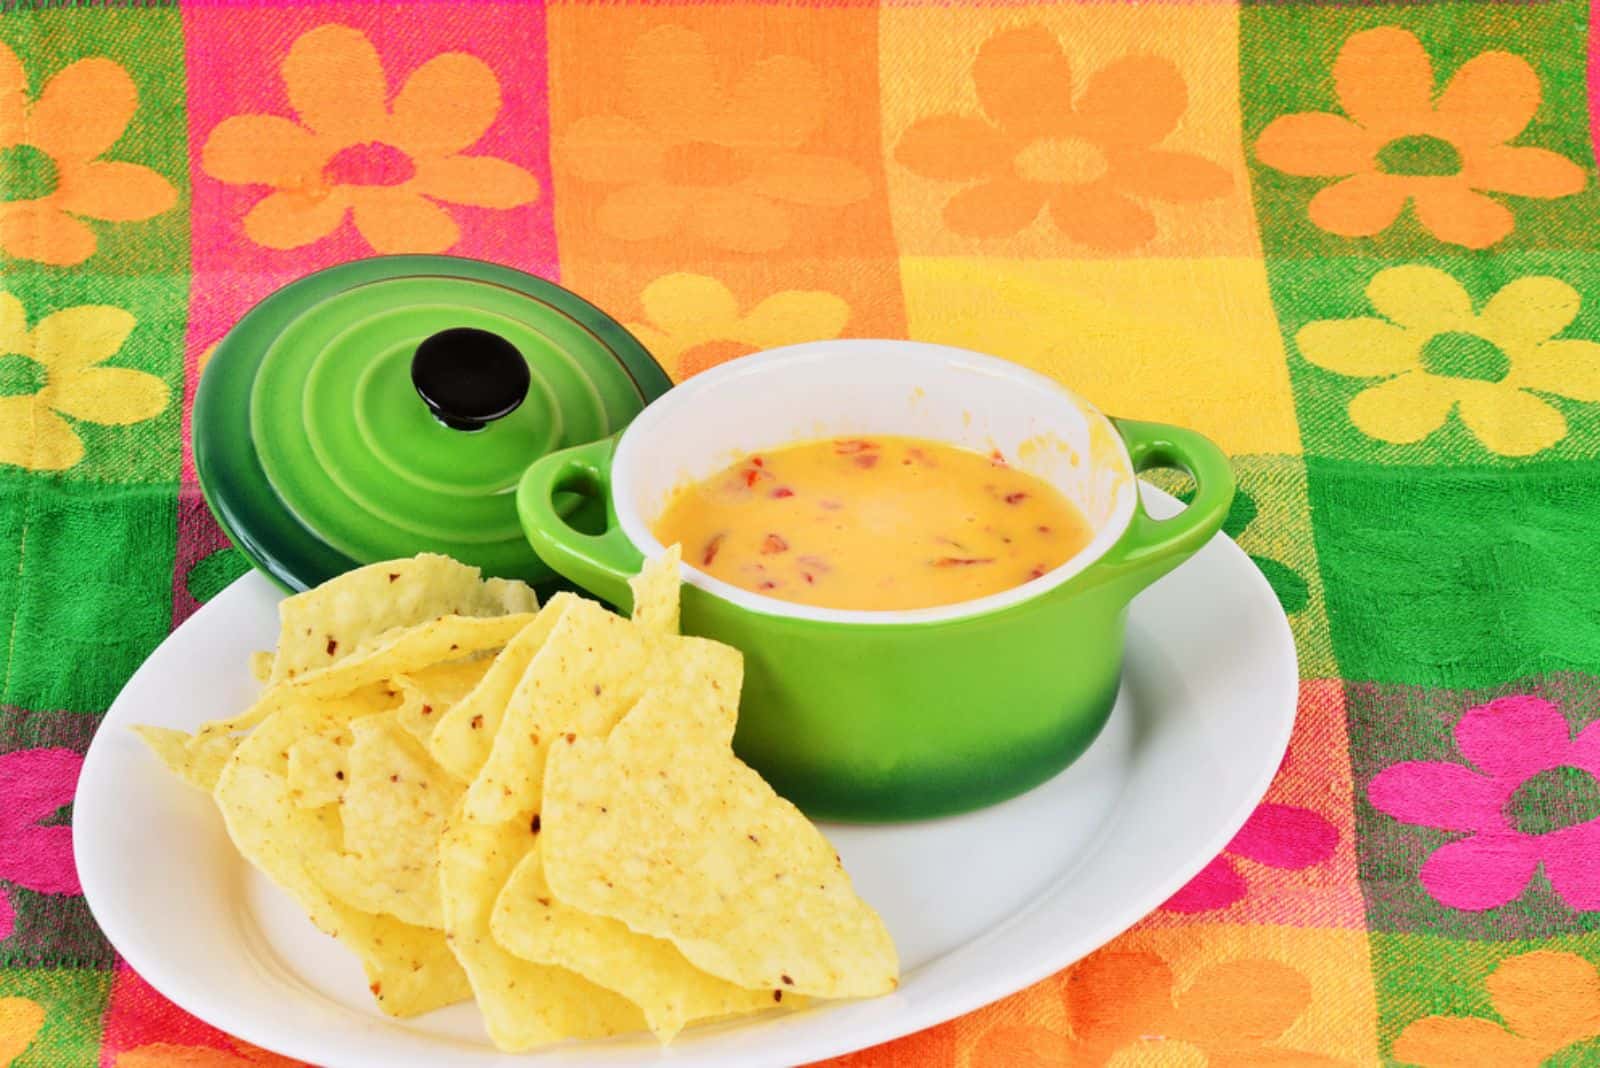 Spicy Chili Con Queso dip in bright green bowl with tortilla chips